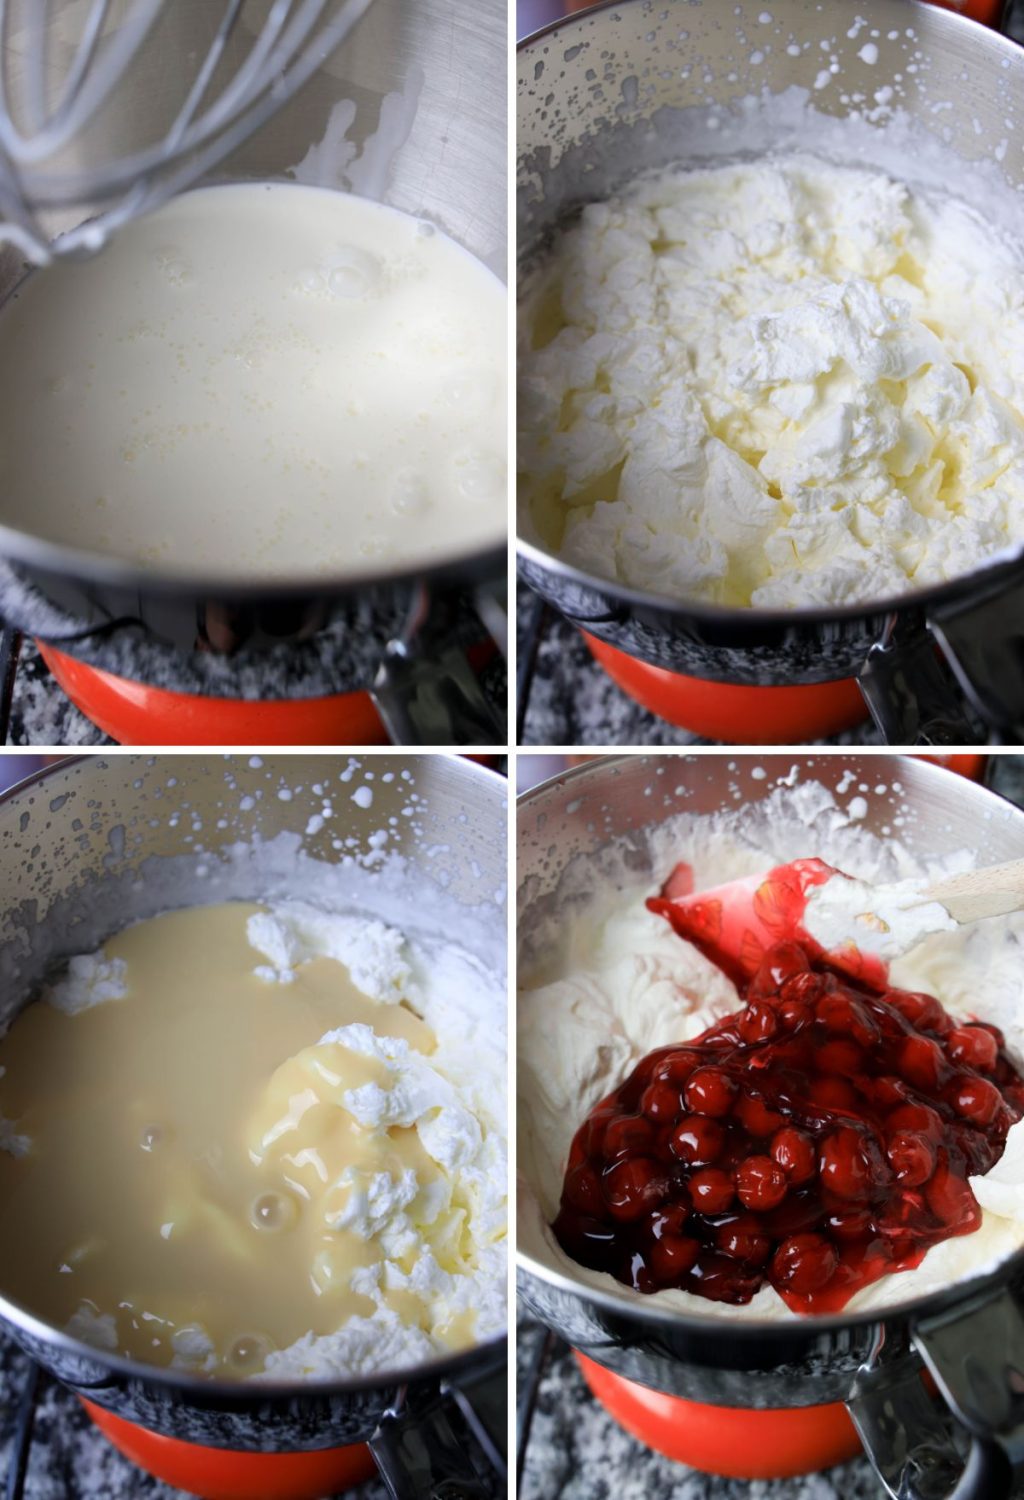 Four pictures showing the process of making a cake with cherries.